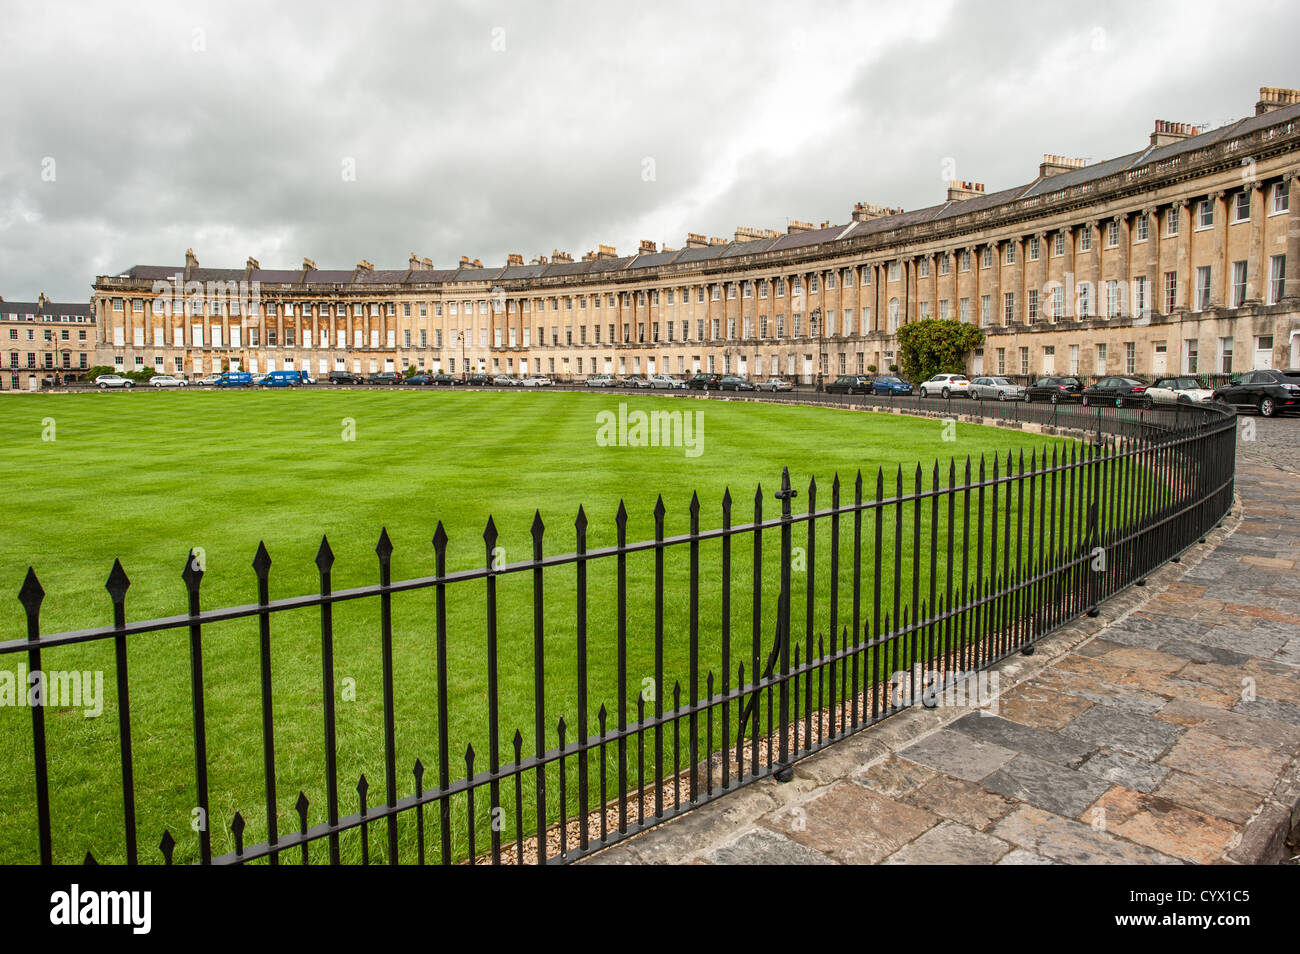 BATH, UK - A large grassed park in front of the Royal Crescent in Bath, Somerset. The Royal Crescent is a street of 30 terraced houses laid out in a sweeping crescent in the city of Bath, England. Designed by the architect John Wood the Younger and built between 1767 and 1774, it is among the greatest examples of Georgian architecture to be found in the United Kingdom and is a Grade I listed building. Although some changes have been made to the various interiors over the years, the Georgian stone façade remains much as it was when it was first built. Stock Photo